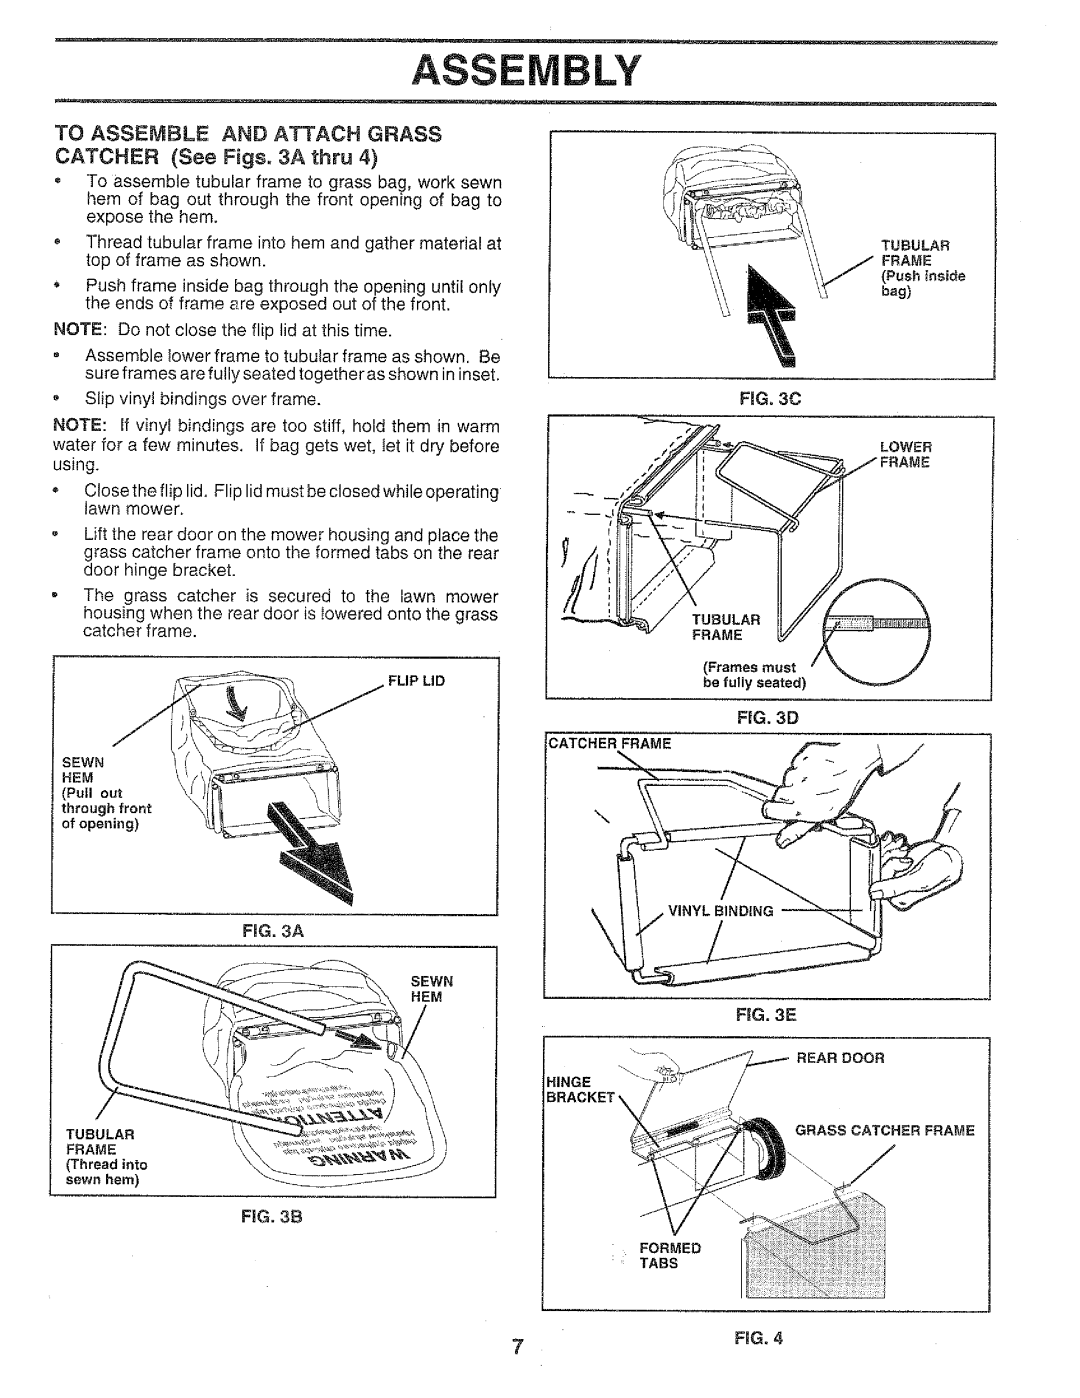 Craftsman 917.37459 owner manual Assembly, To Assemble And Attach Grass, CATCHER See Figs. 3A thru 